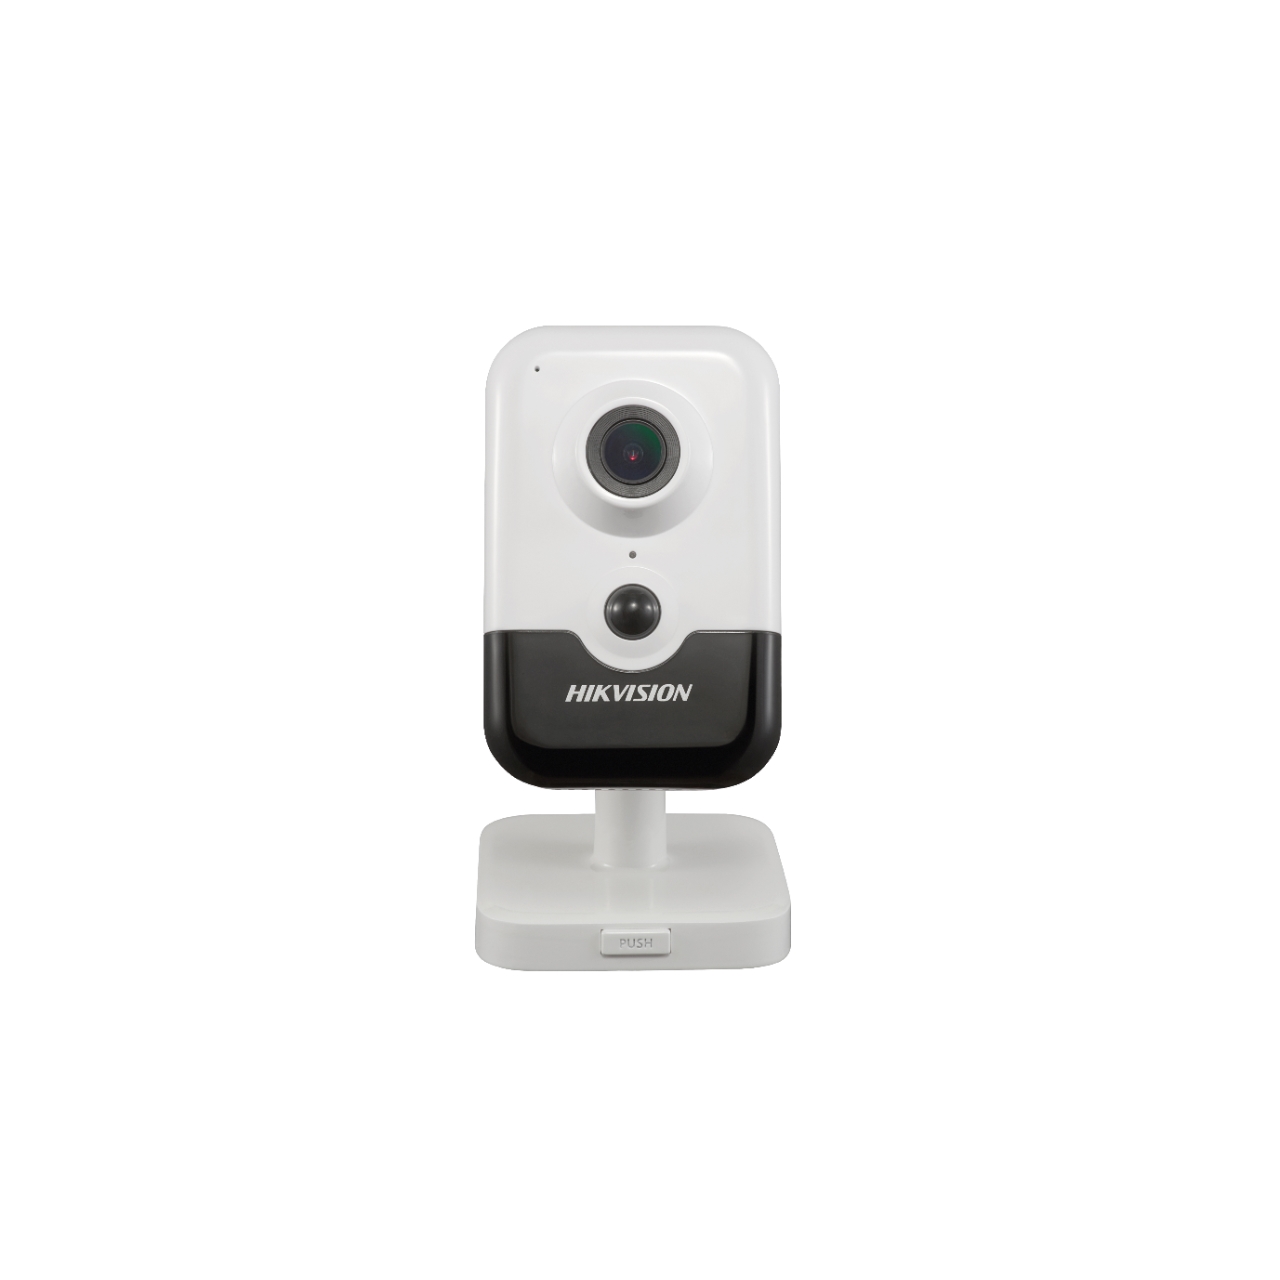 HIKVISION%20DS-2CD2443G0-IW%204MP%202.8MM%2010MT%20H265+%20WIFI%20CUBE%20KAMERA